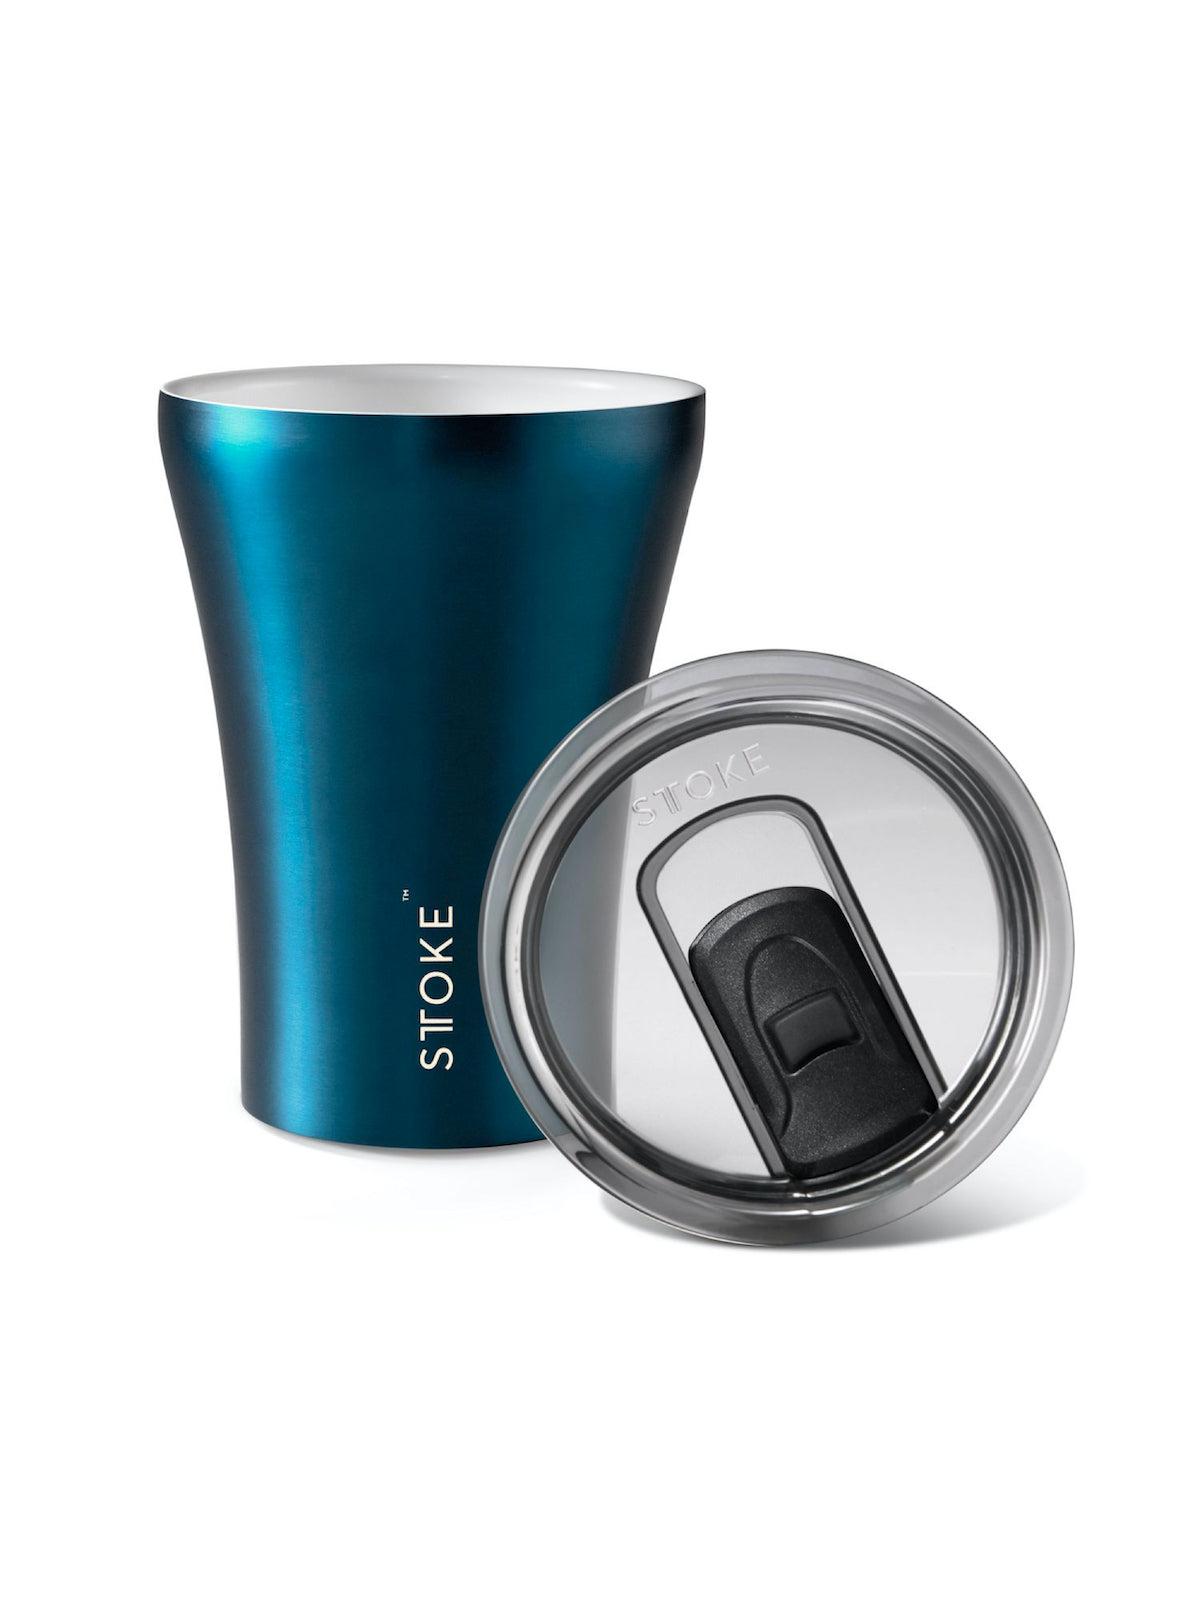 Sttoke Limited Edition Insulated Ceramic Cup 8oz Steel Blue